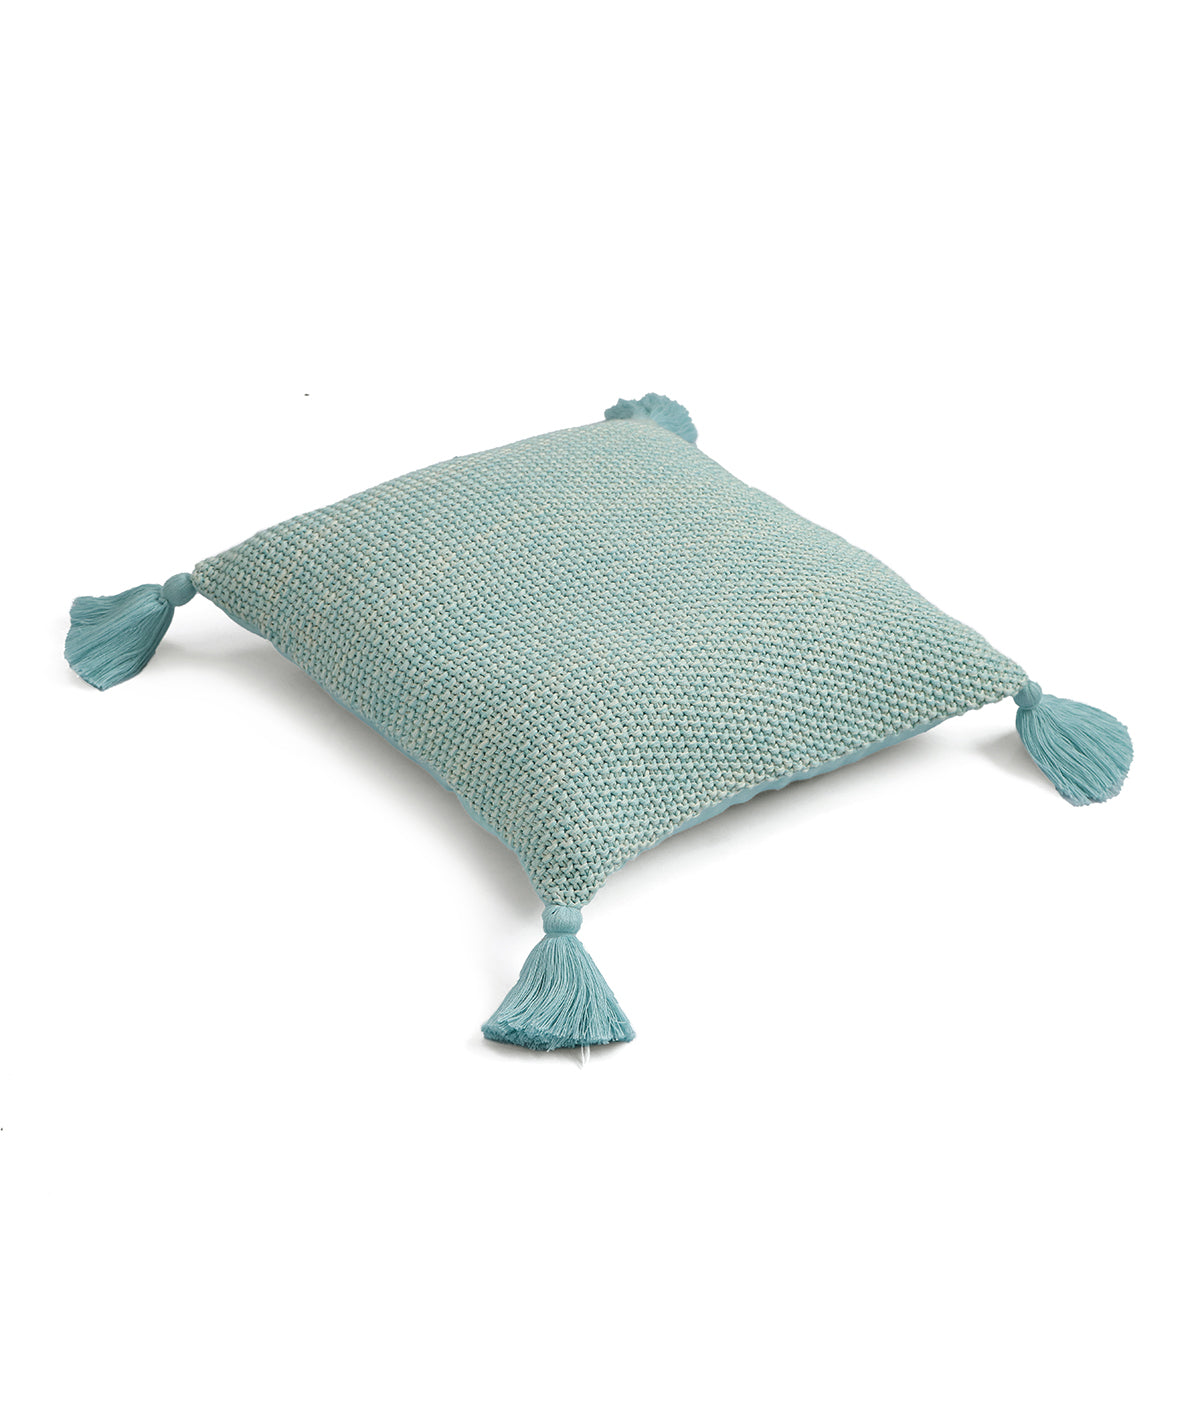 Moss knit Cotton Knitted Decorative Cushion Cover (Sky blue & Natural) (16" x 16")